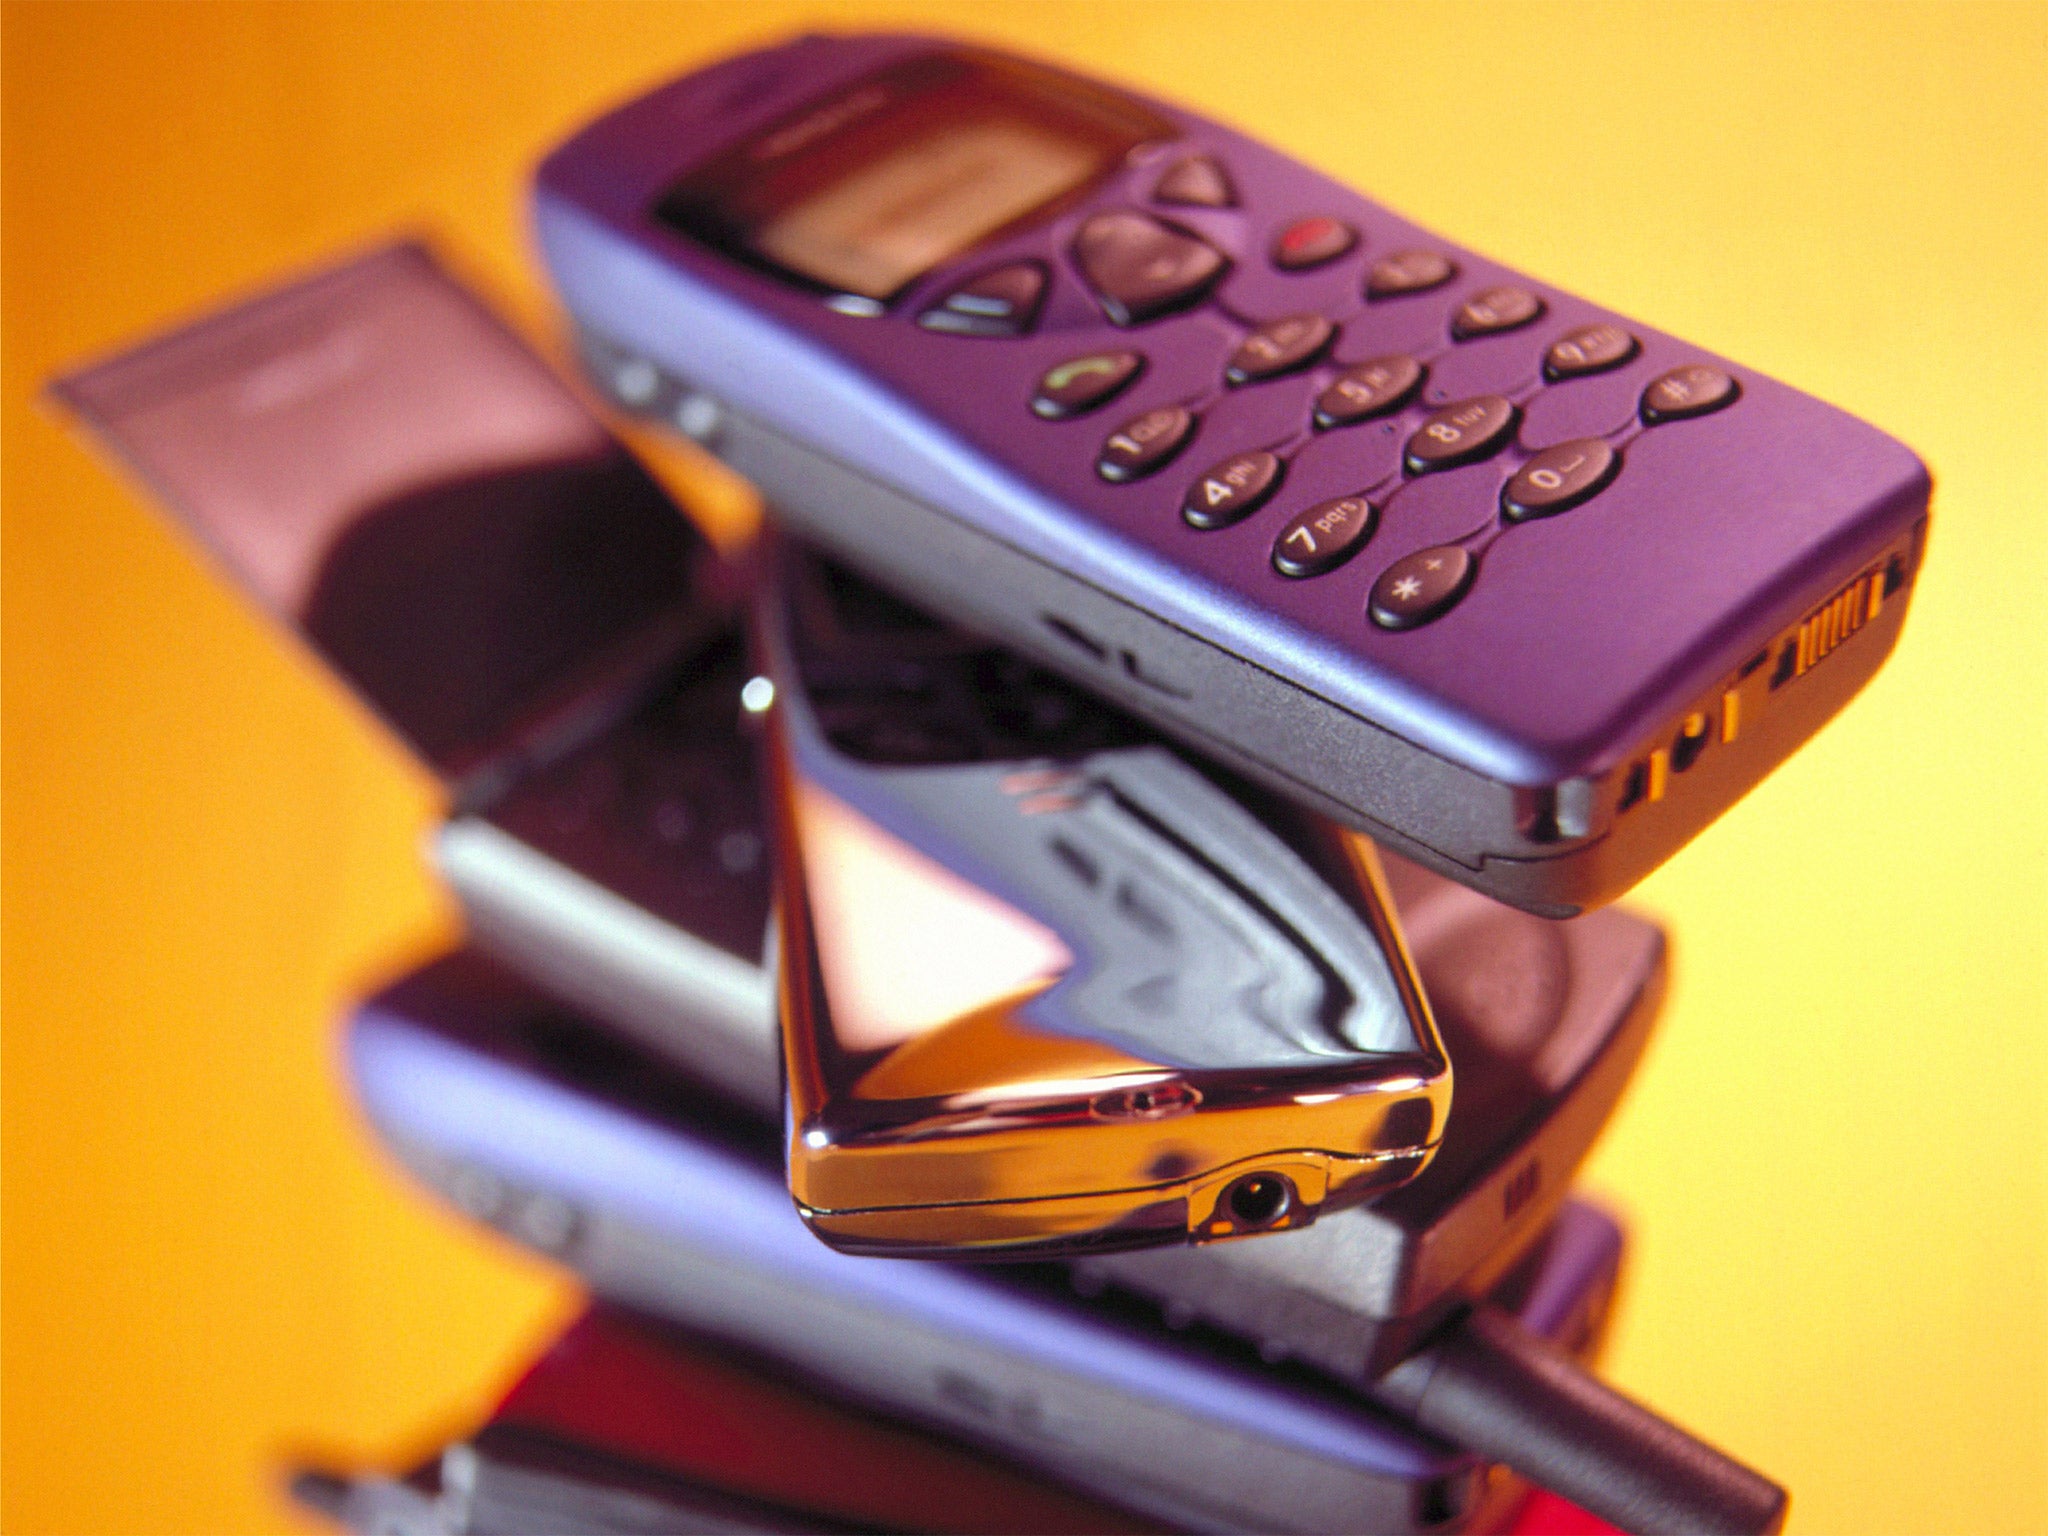 Britons buy more than 30 million handsets each year, keeping them for an average of 18 months